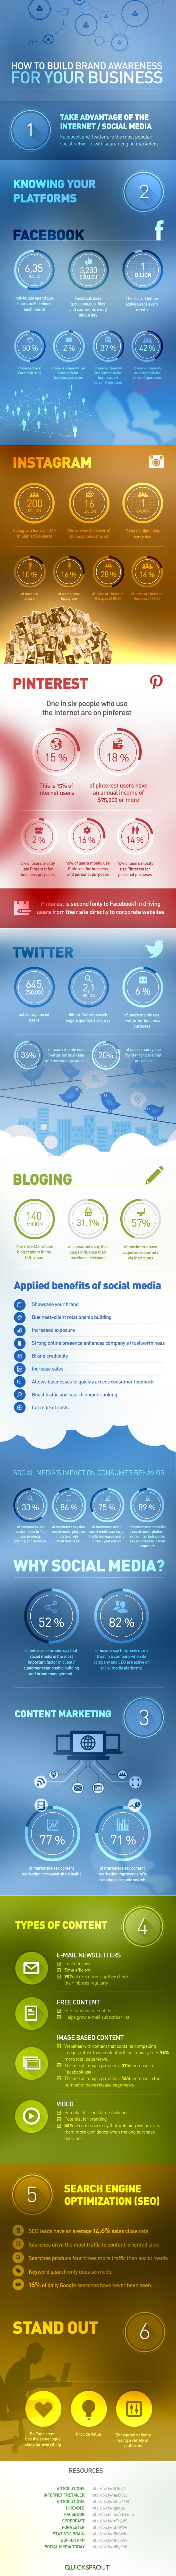 How to Build Brand Awareness for Your Civil Construction Business infograph